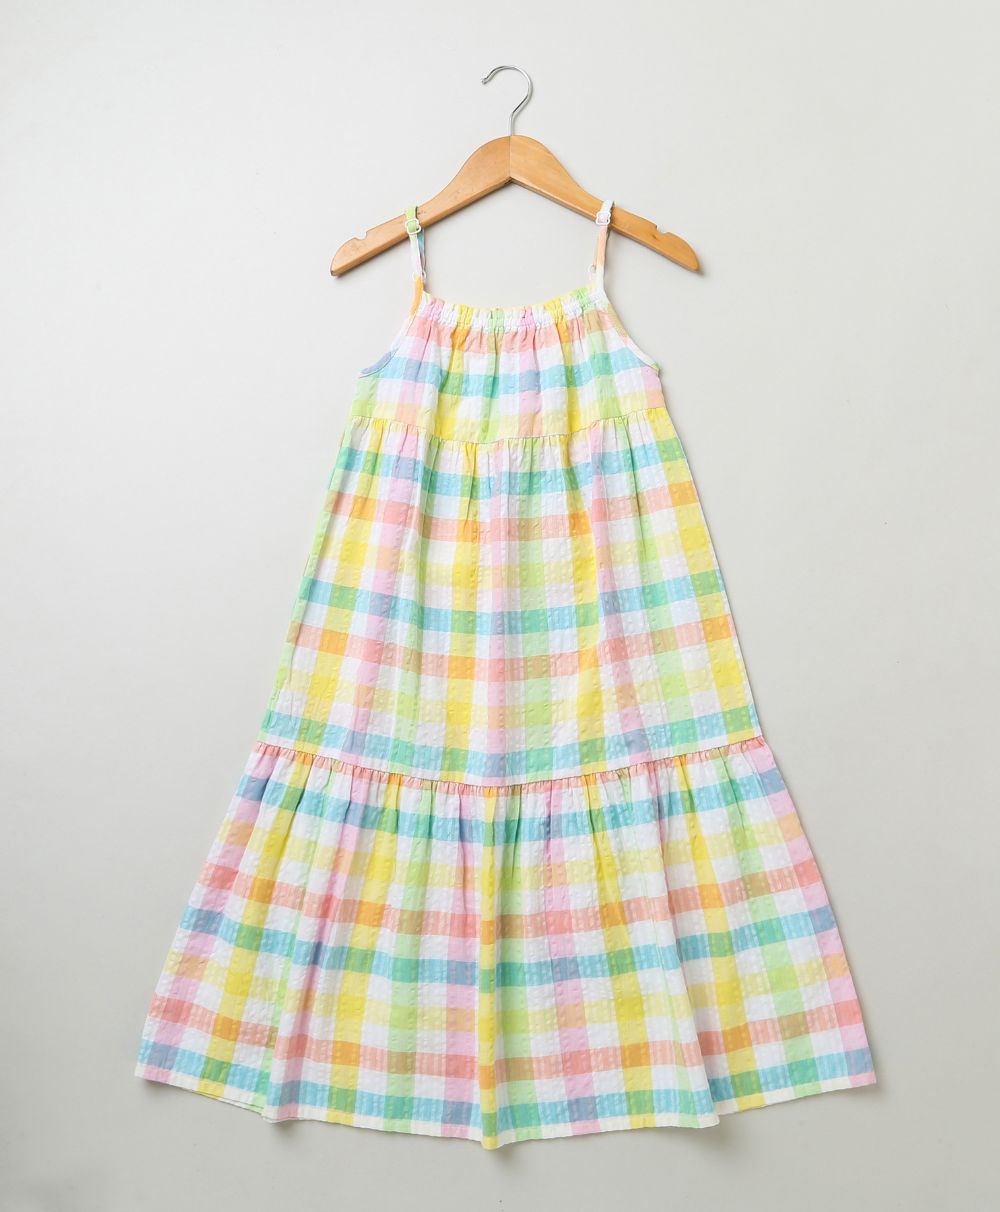 Sweetlime By AS Cotton Singlet Sleeves frock with ajustable strap Shoulder Checkered - Multi - SLG-DRESS-00955_2-3 Y